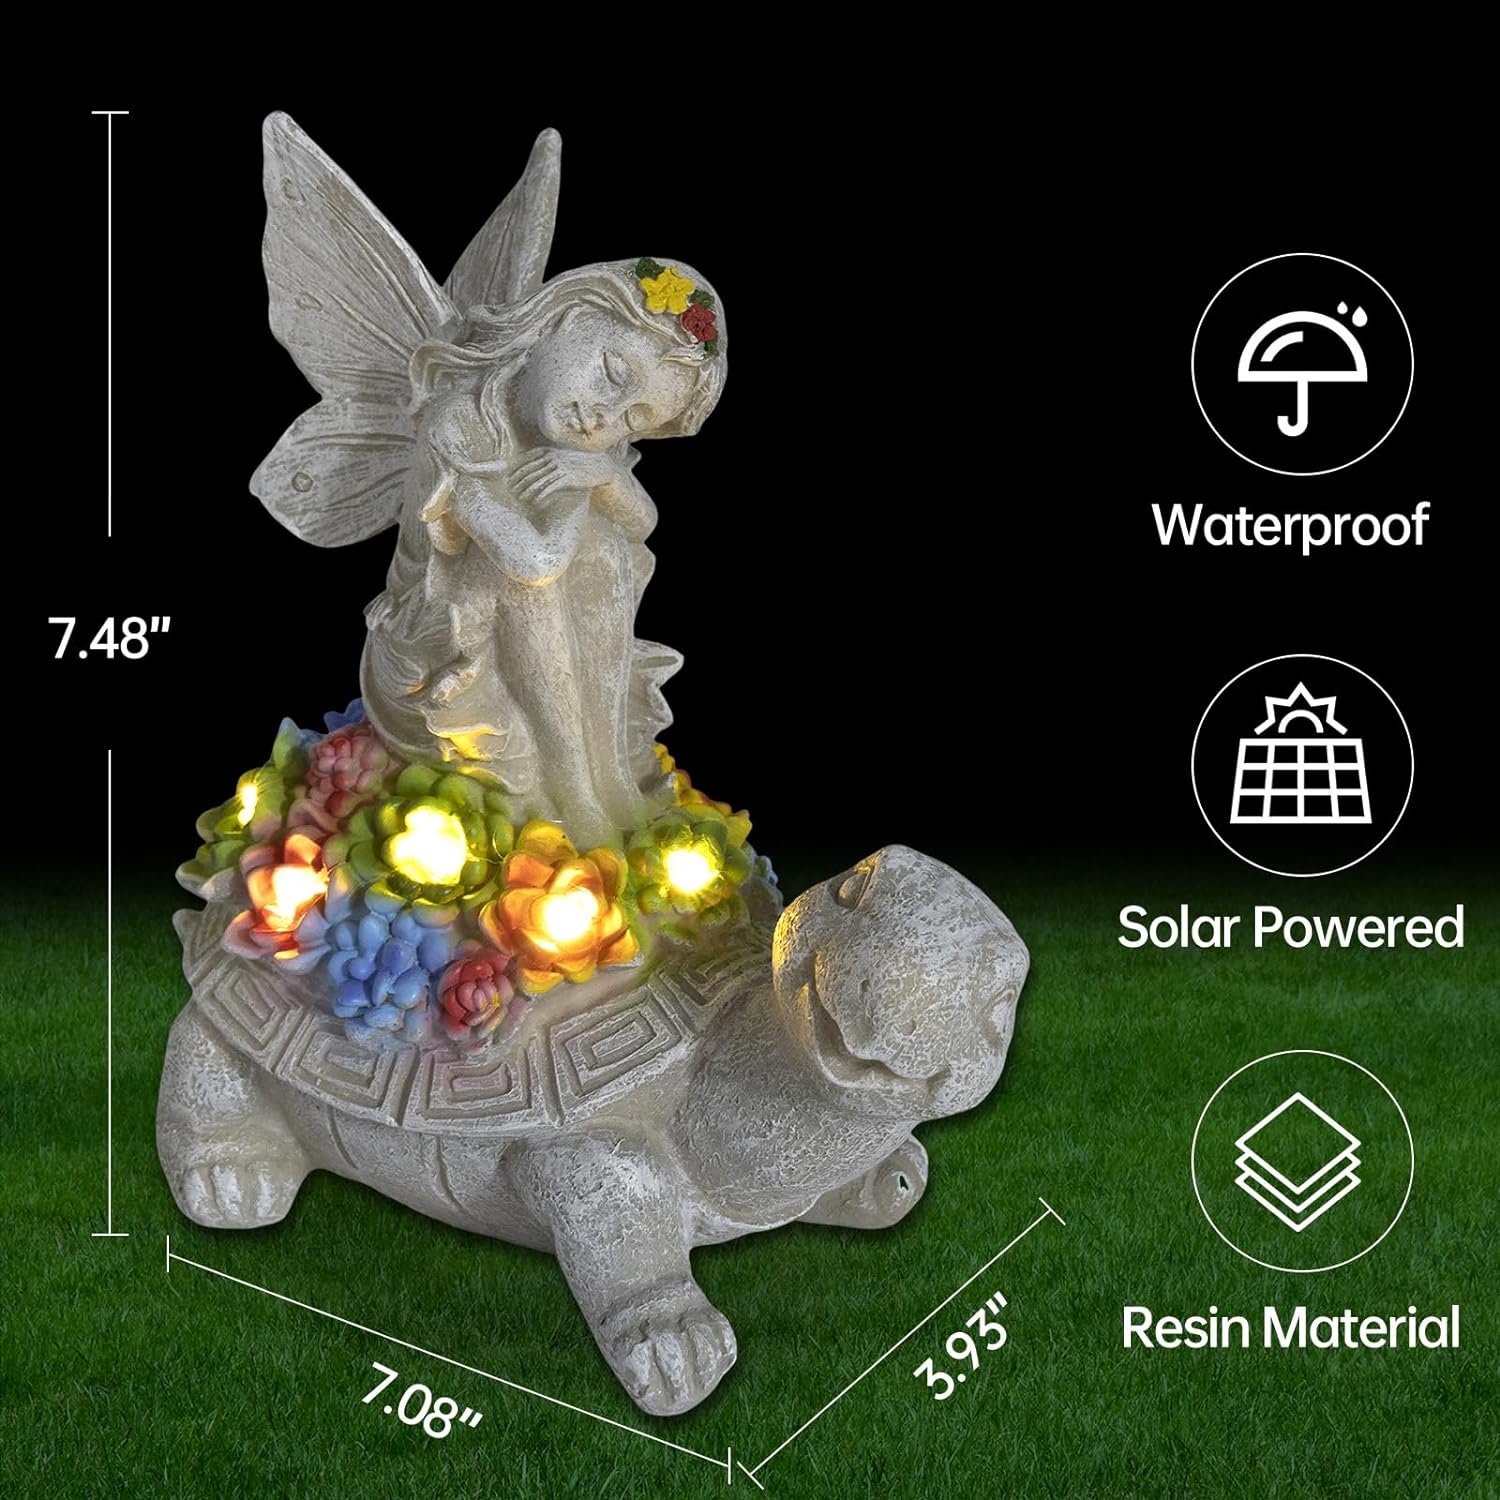 Turtle Garden Decor Solar Turtle Statyes Outdoor With Fairy Angel Lights Lawn Tortoise For Patio, Balkony, Yard, Decorations With LED Lights Ornament Housaraming